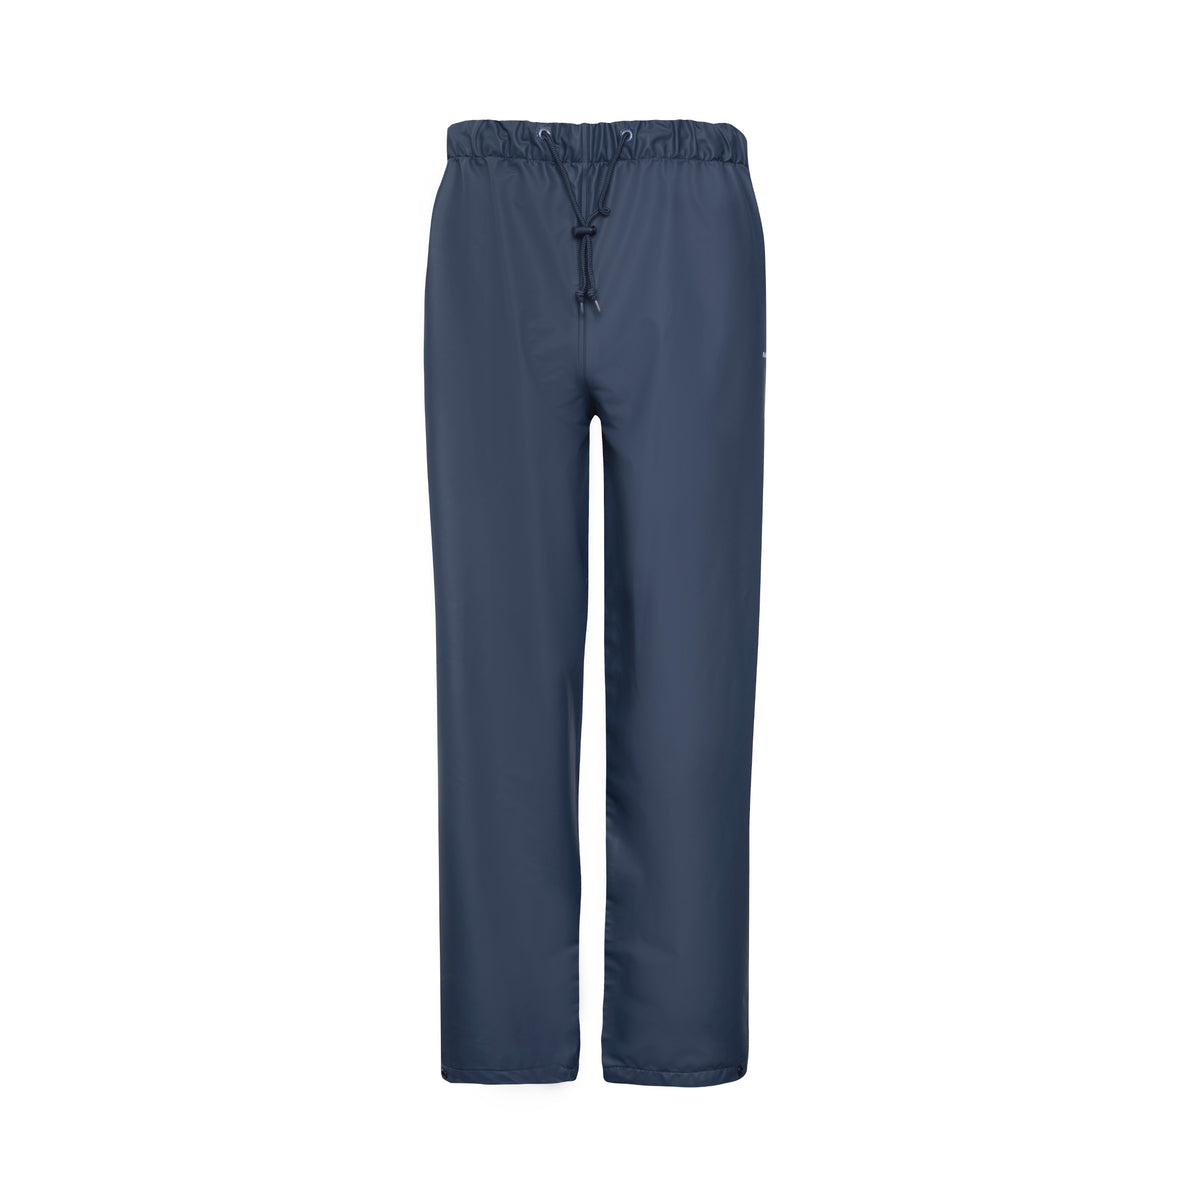 Front view of Rainbird Shelter Pants in Navy